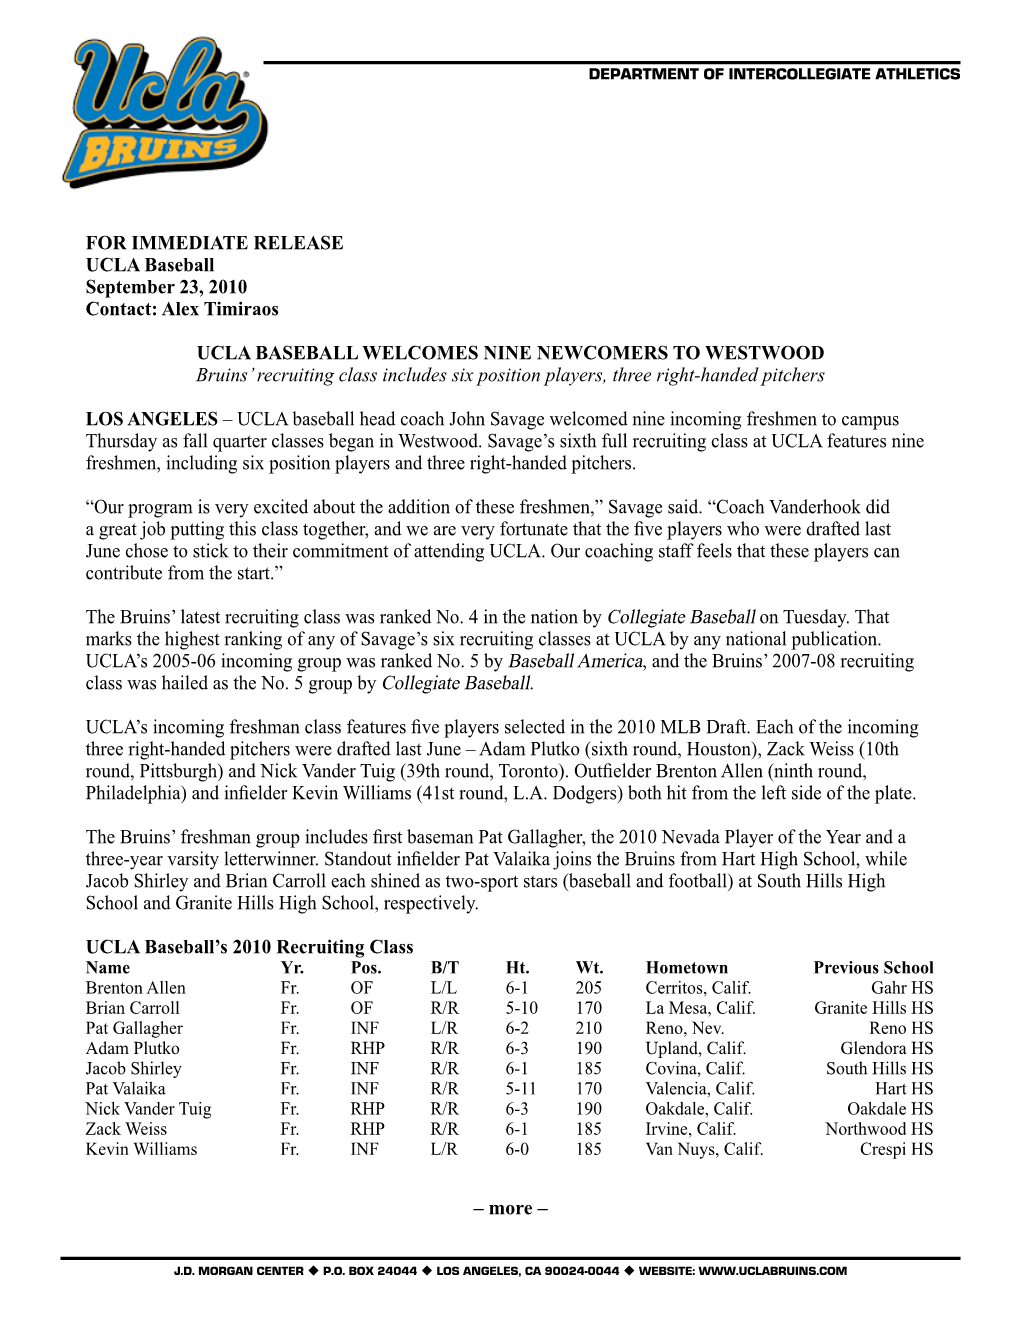 FOR IMMEDIATE RELEASE UCLA Baseball September 23, 2010 Contact: Alex Timiraos